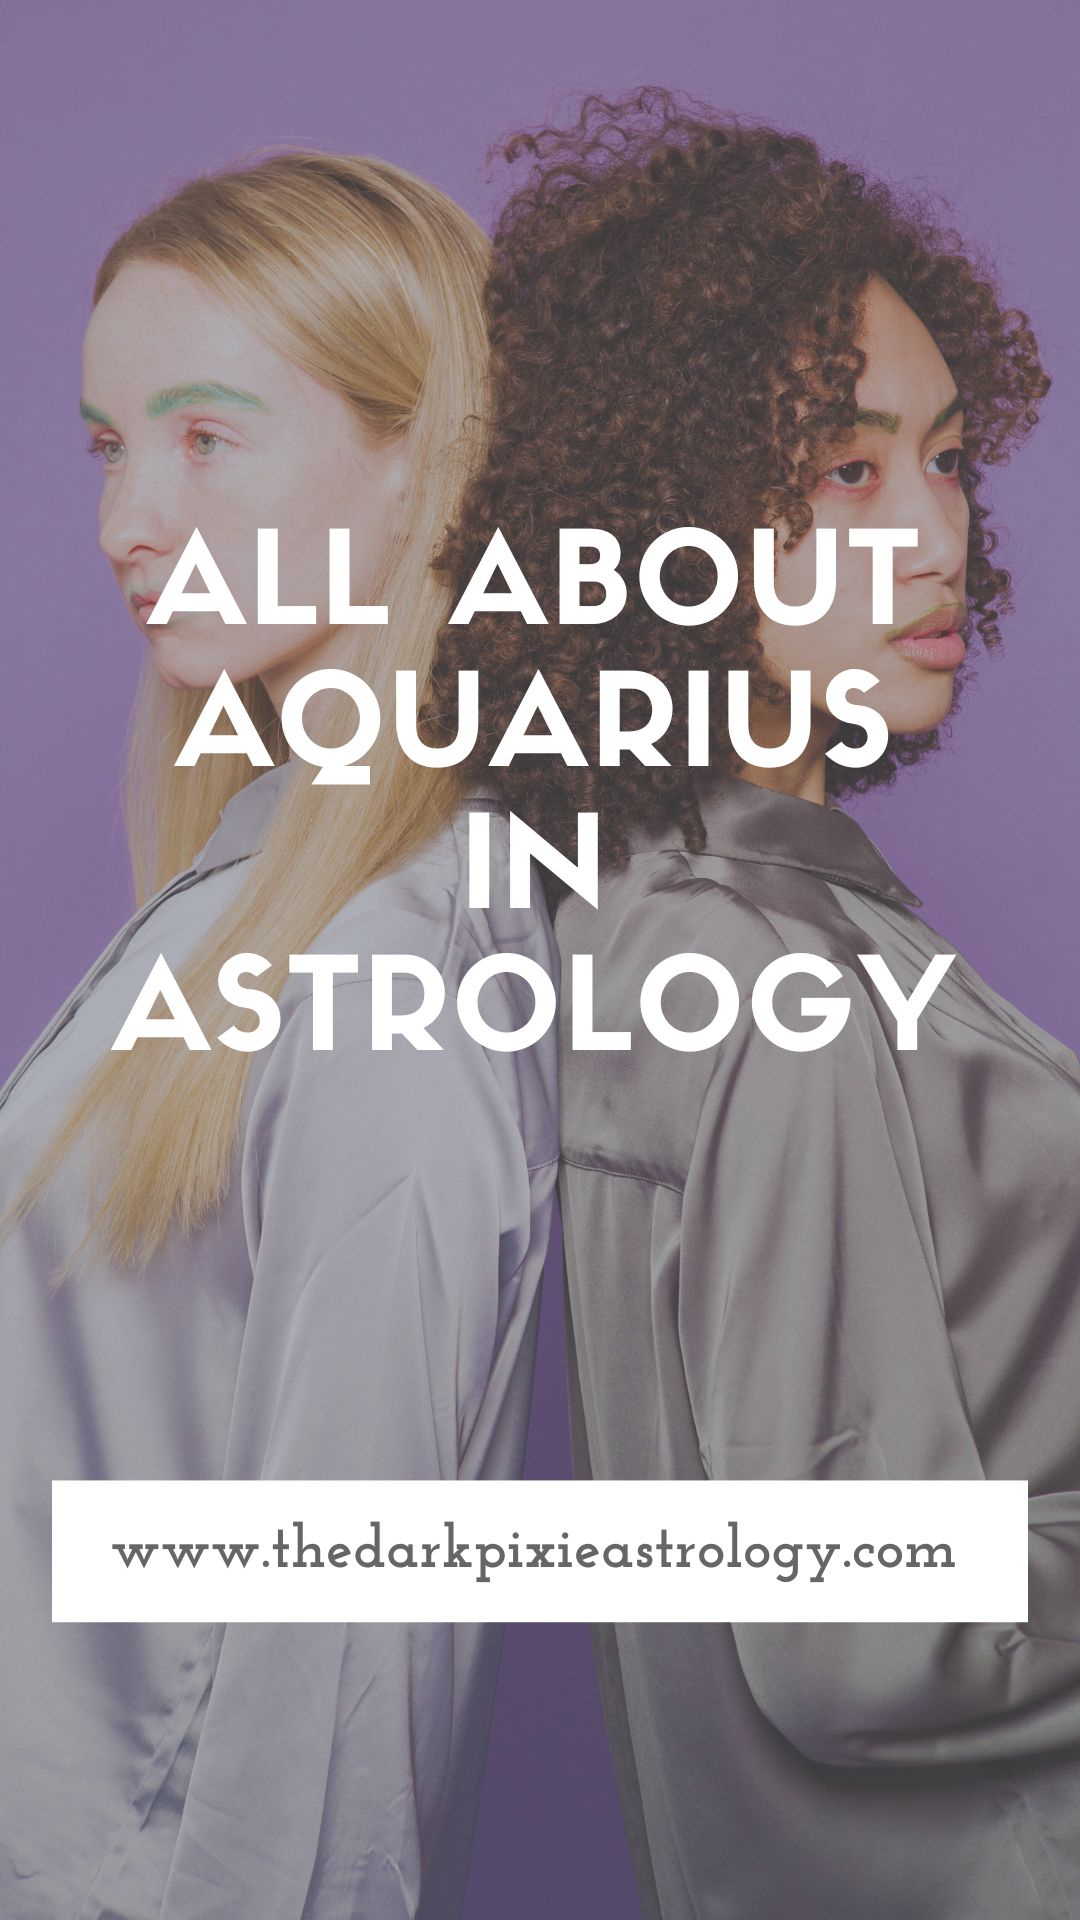 All About Aquarius in Astrology - The Dark Pixie Astrology